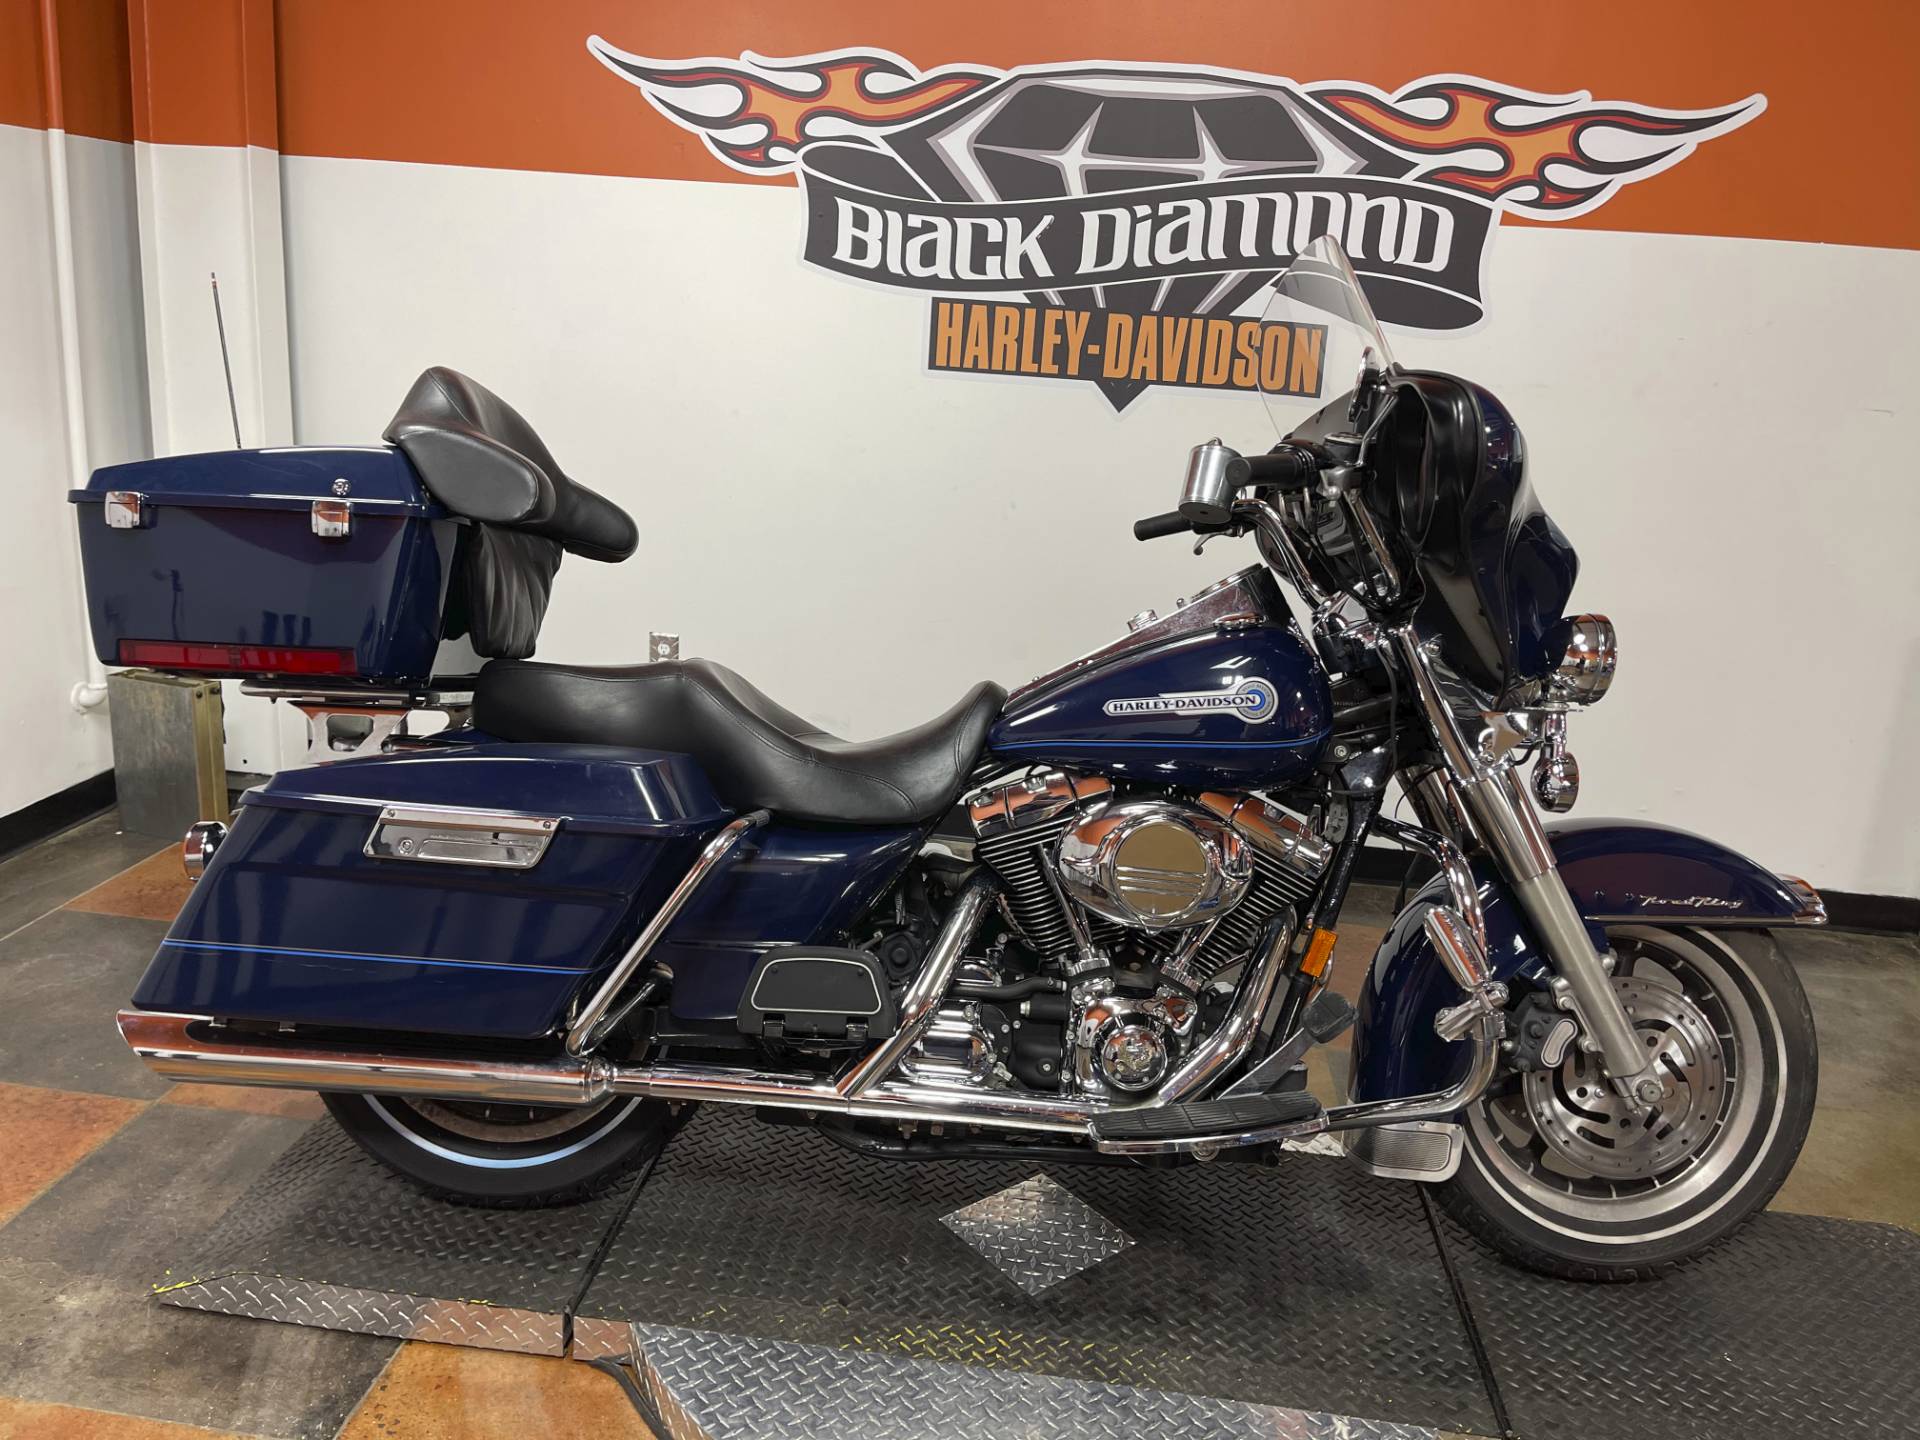 Used 2005 Harley Davidson Flhr Flhri Road King Two Tone Rich Sunglo Blue Chopper Blue Pearl Motorcycles In Marion Il U611519